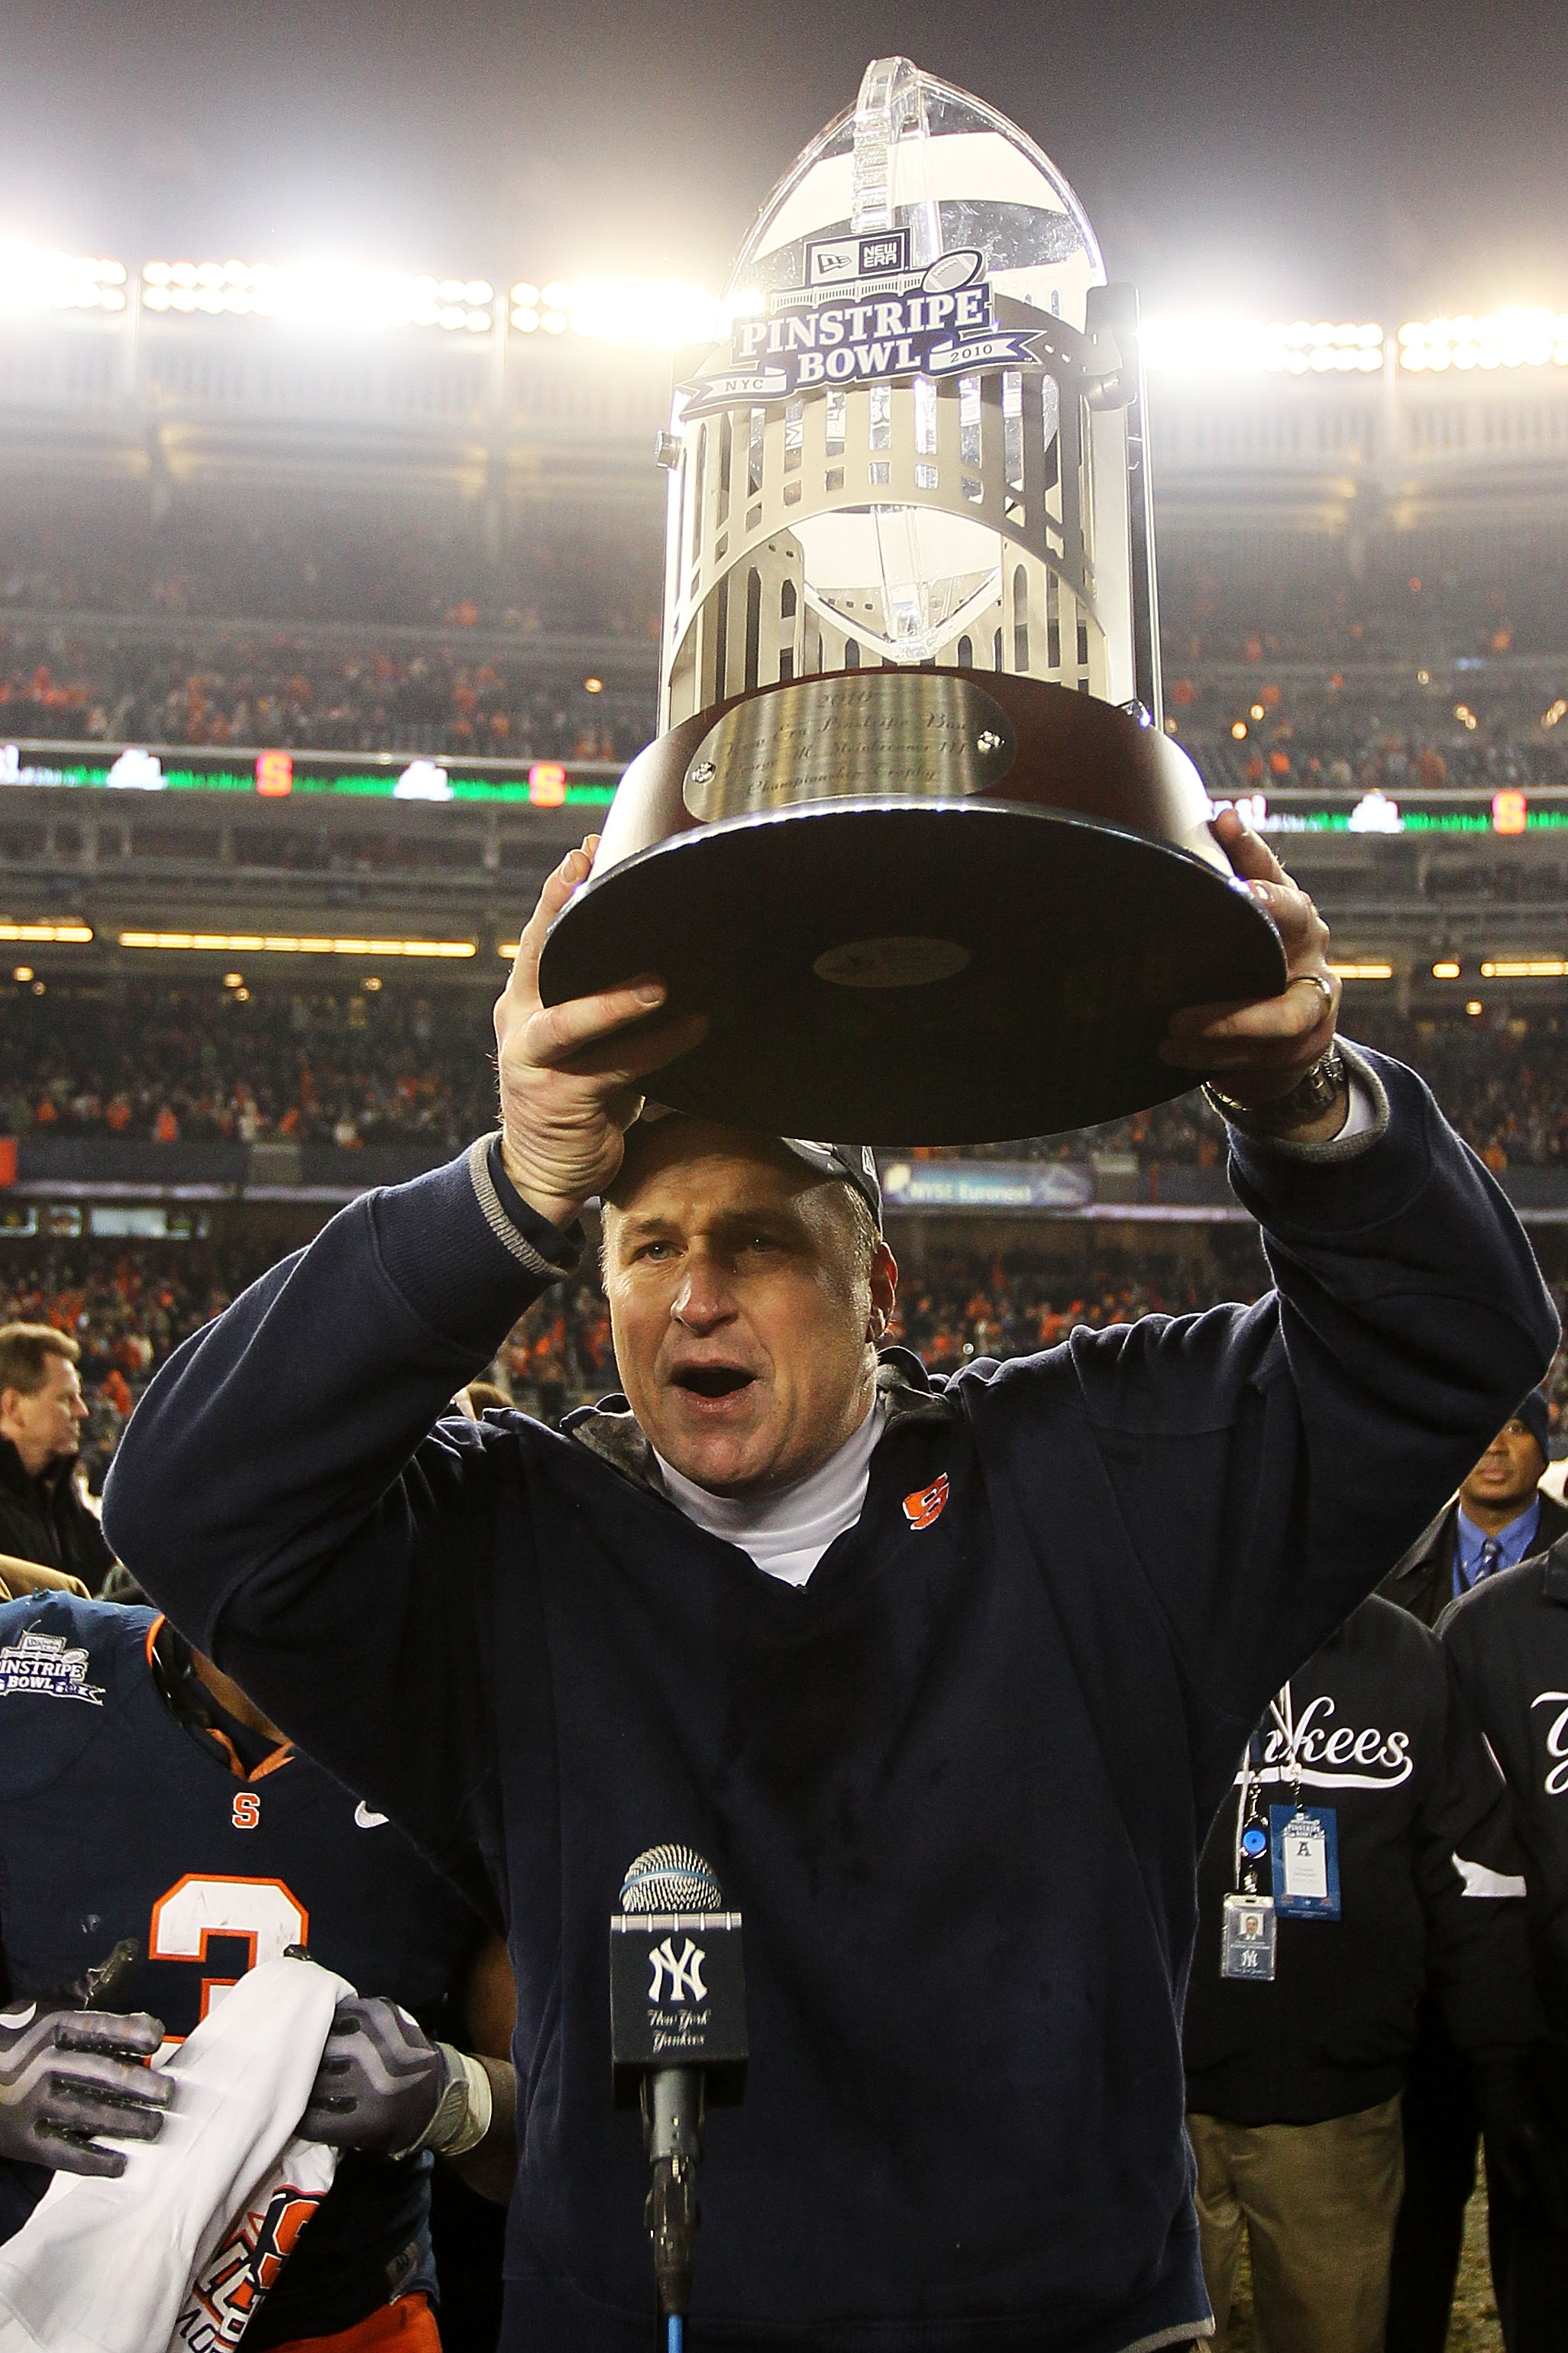 NEW YORK, NY - DECEMBER 30:  Syracuse Orange head coach Doug Marrone holds aloft the Pinstripe Bowl trophy after defeating the Kansas State Wildcats during the New Era Pinstripe Bowl at Yankee Stadium on December 30, 2010 in New York, New York.  (Photo by